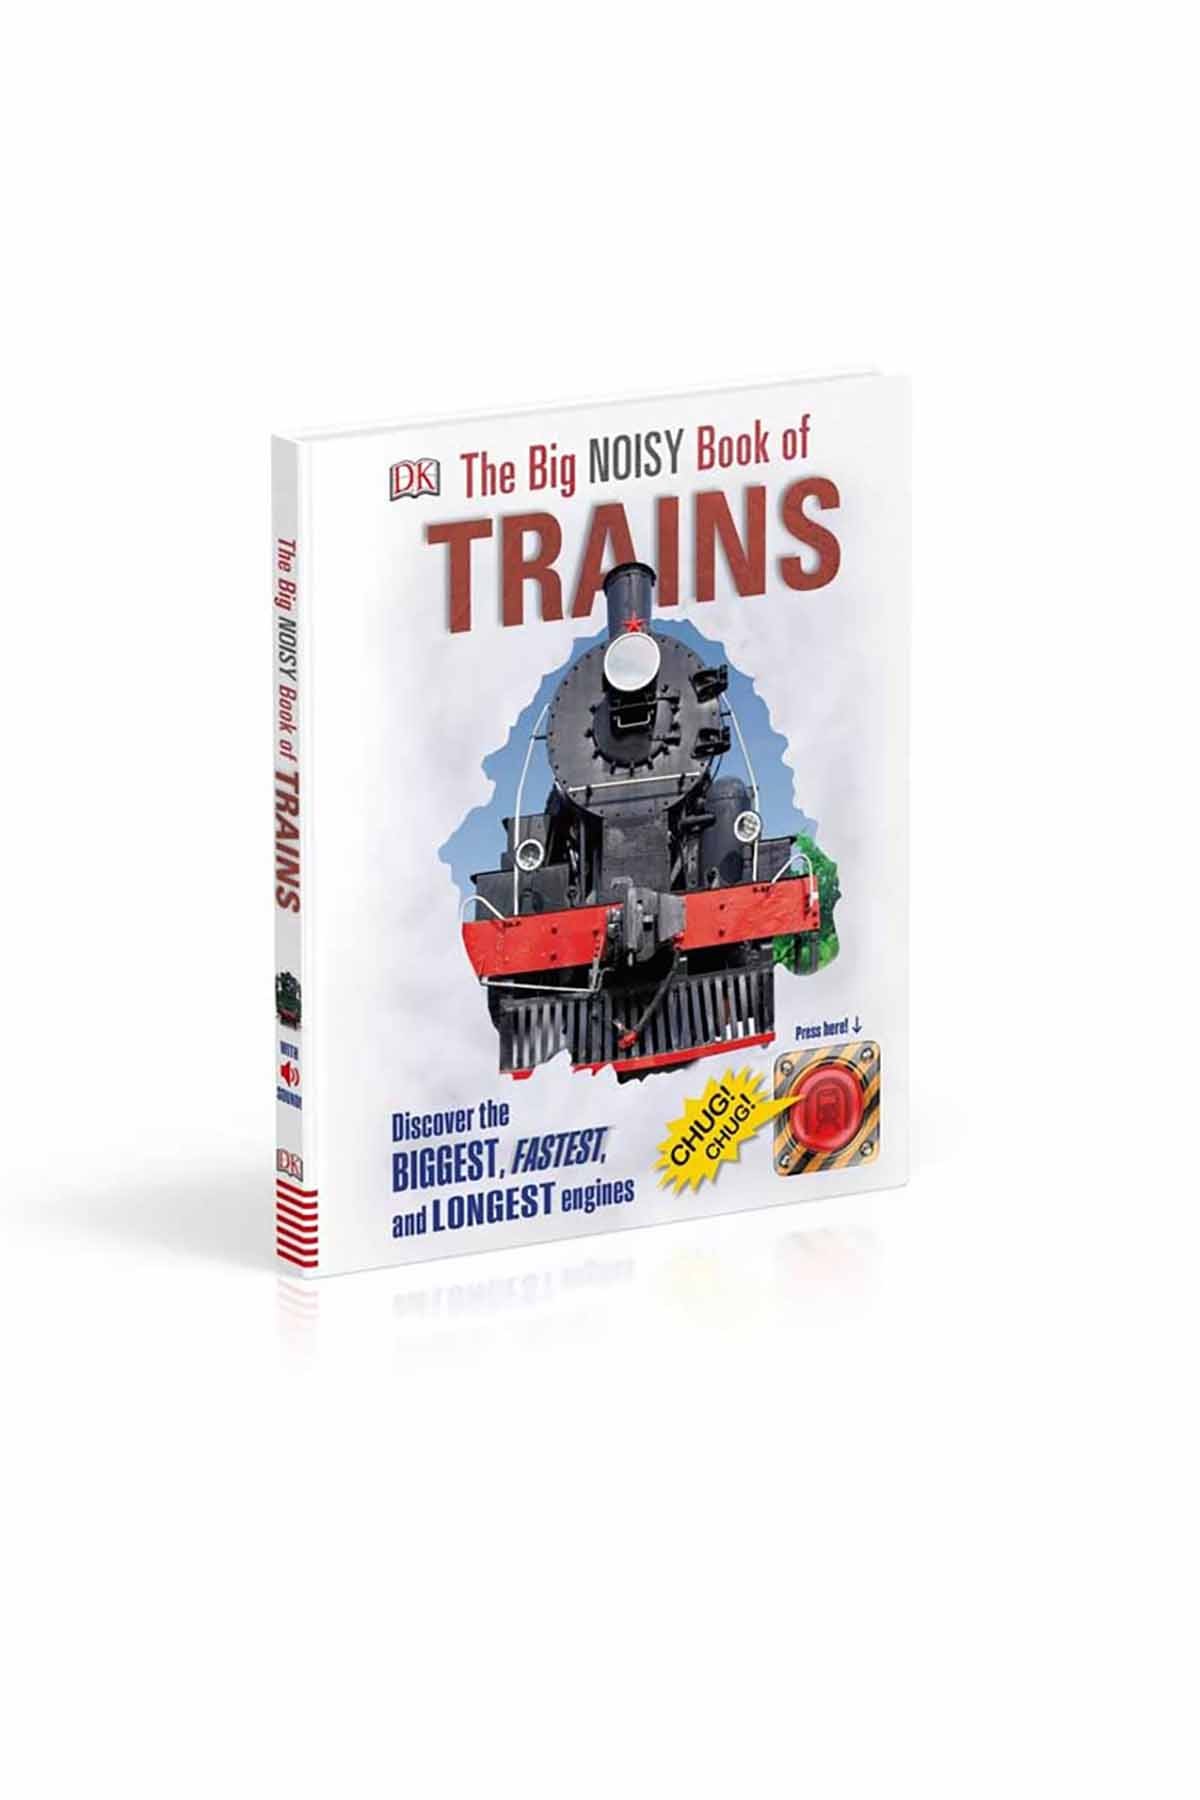 The Big Noisy Book of Trains